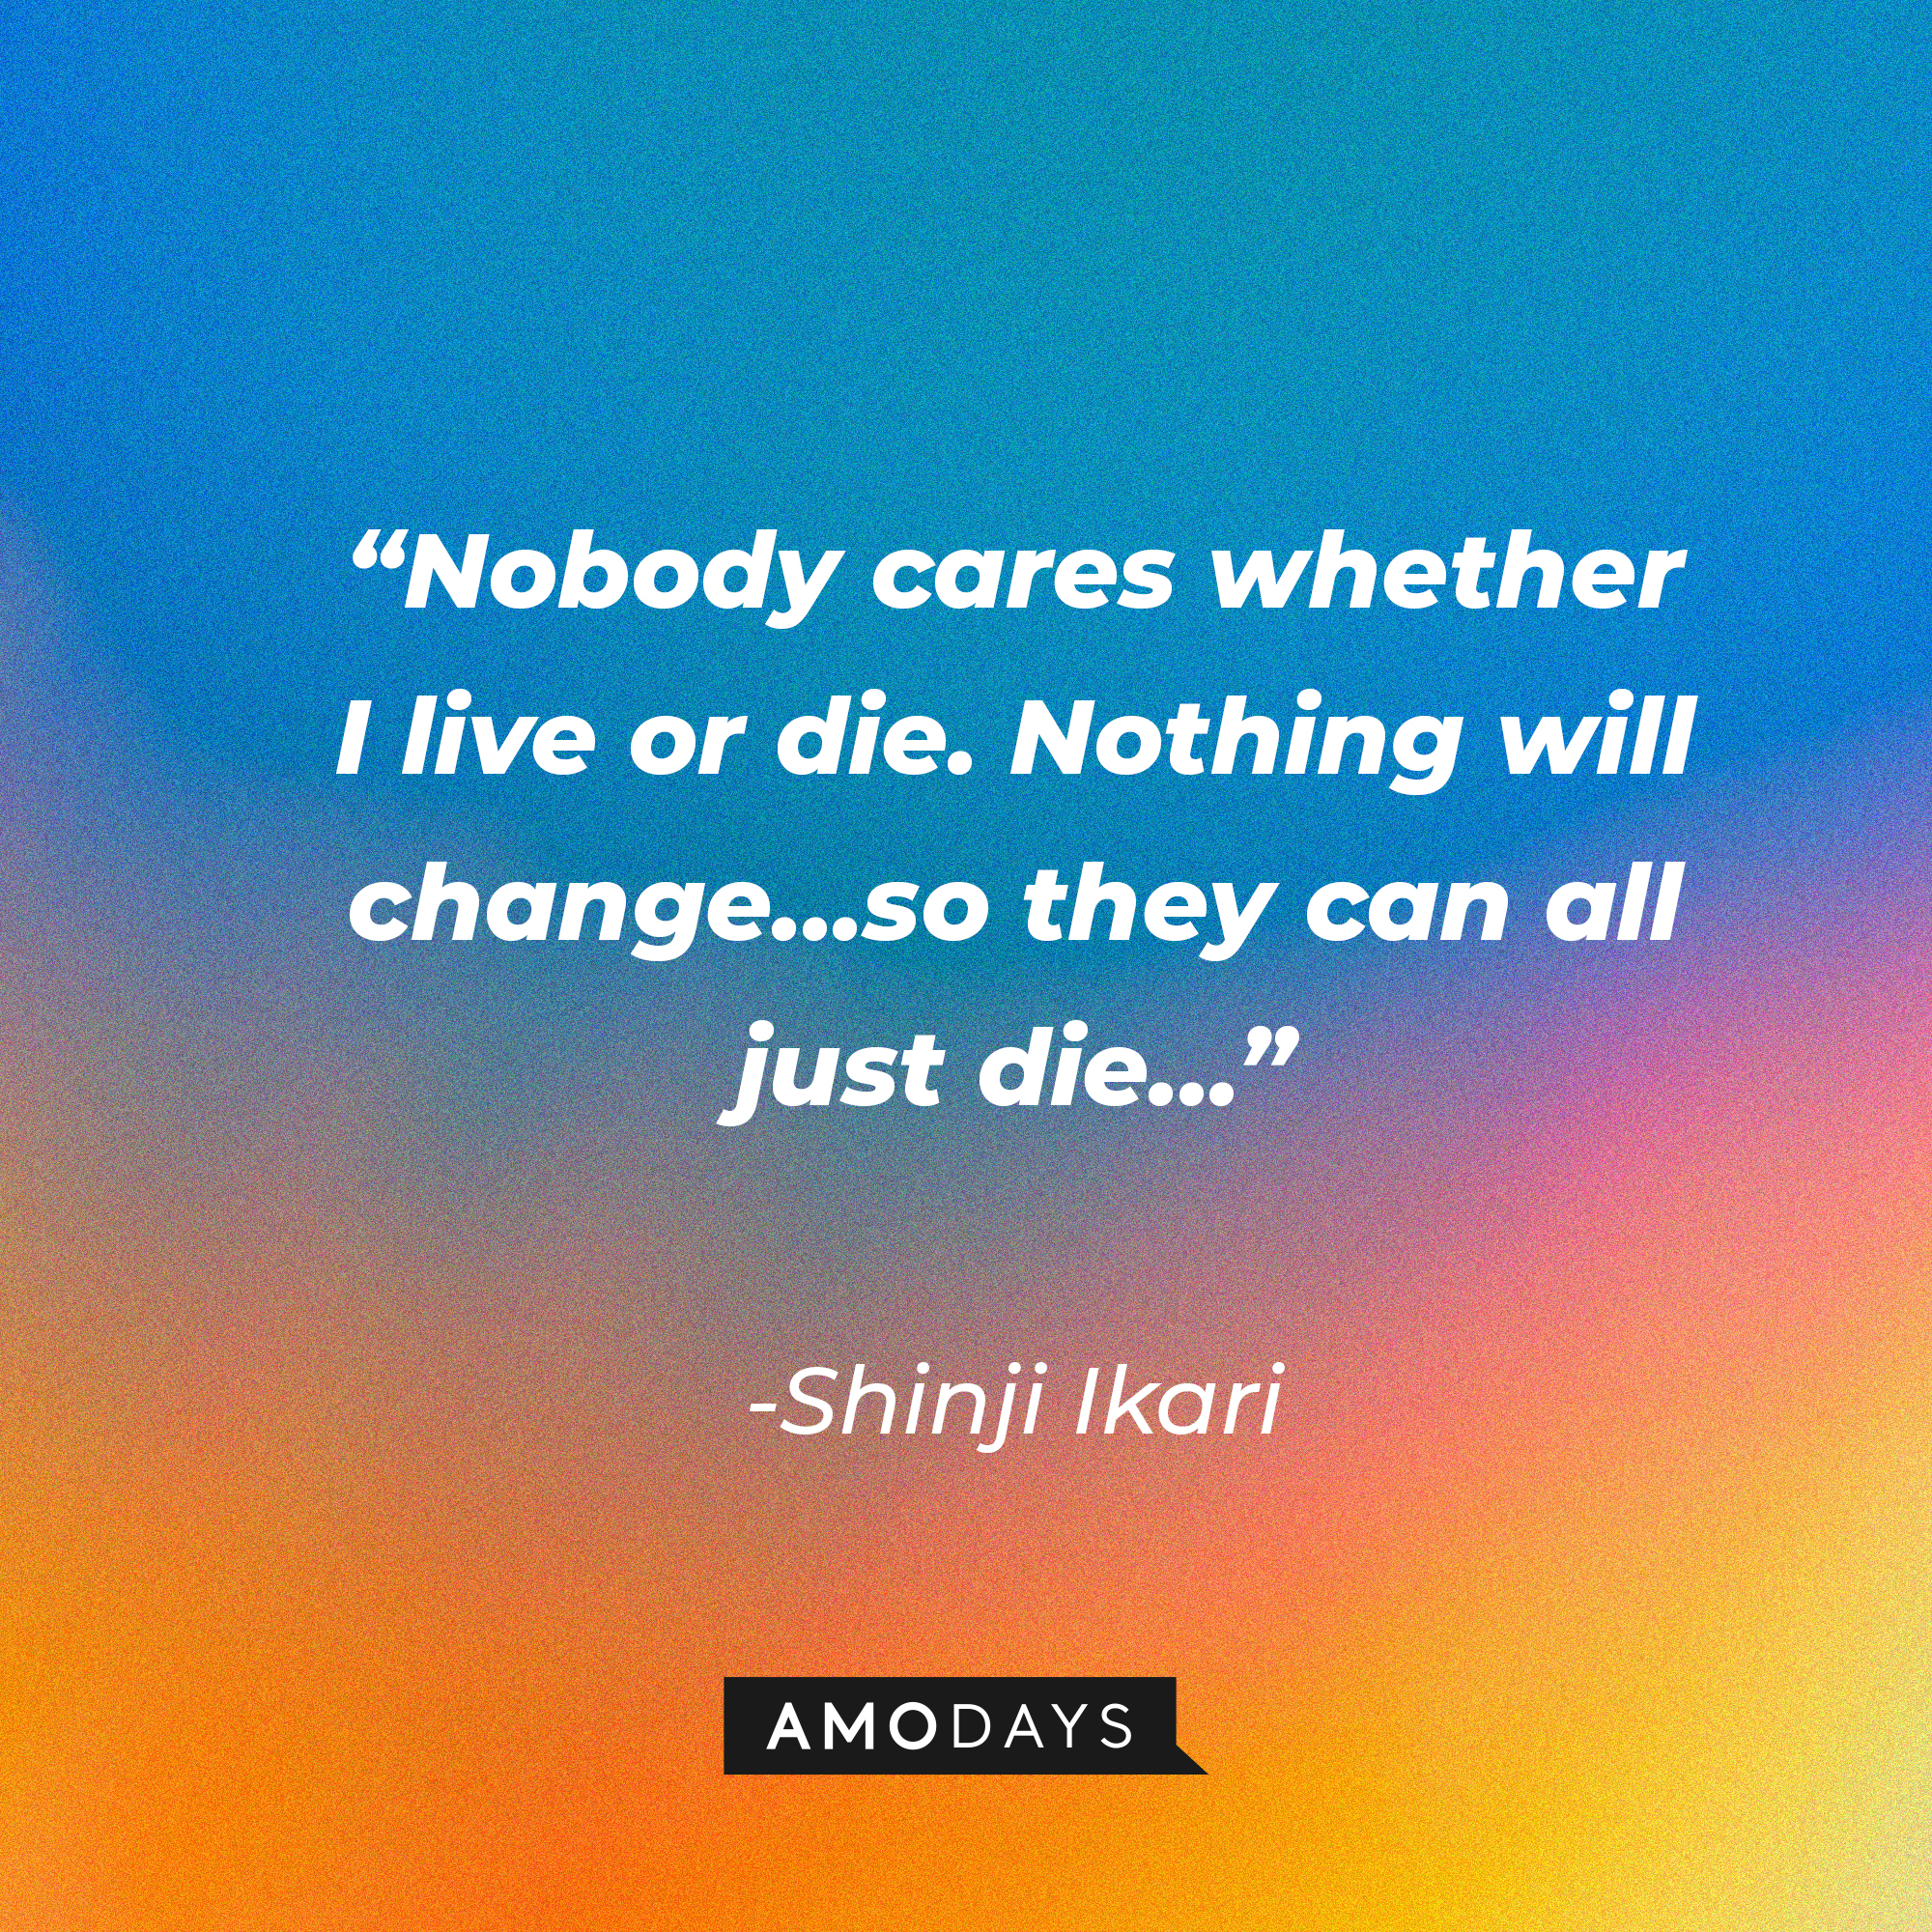 Shinji Ikari’s quote: “Nobody cares whether I live or die. Nothing will change…so they can all just die…” | Source: AmoDays